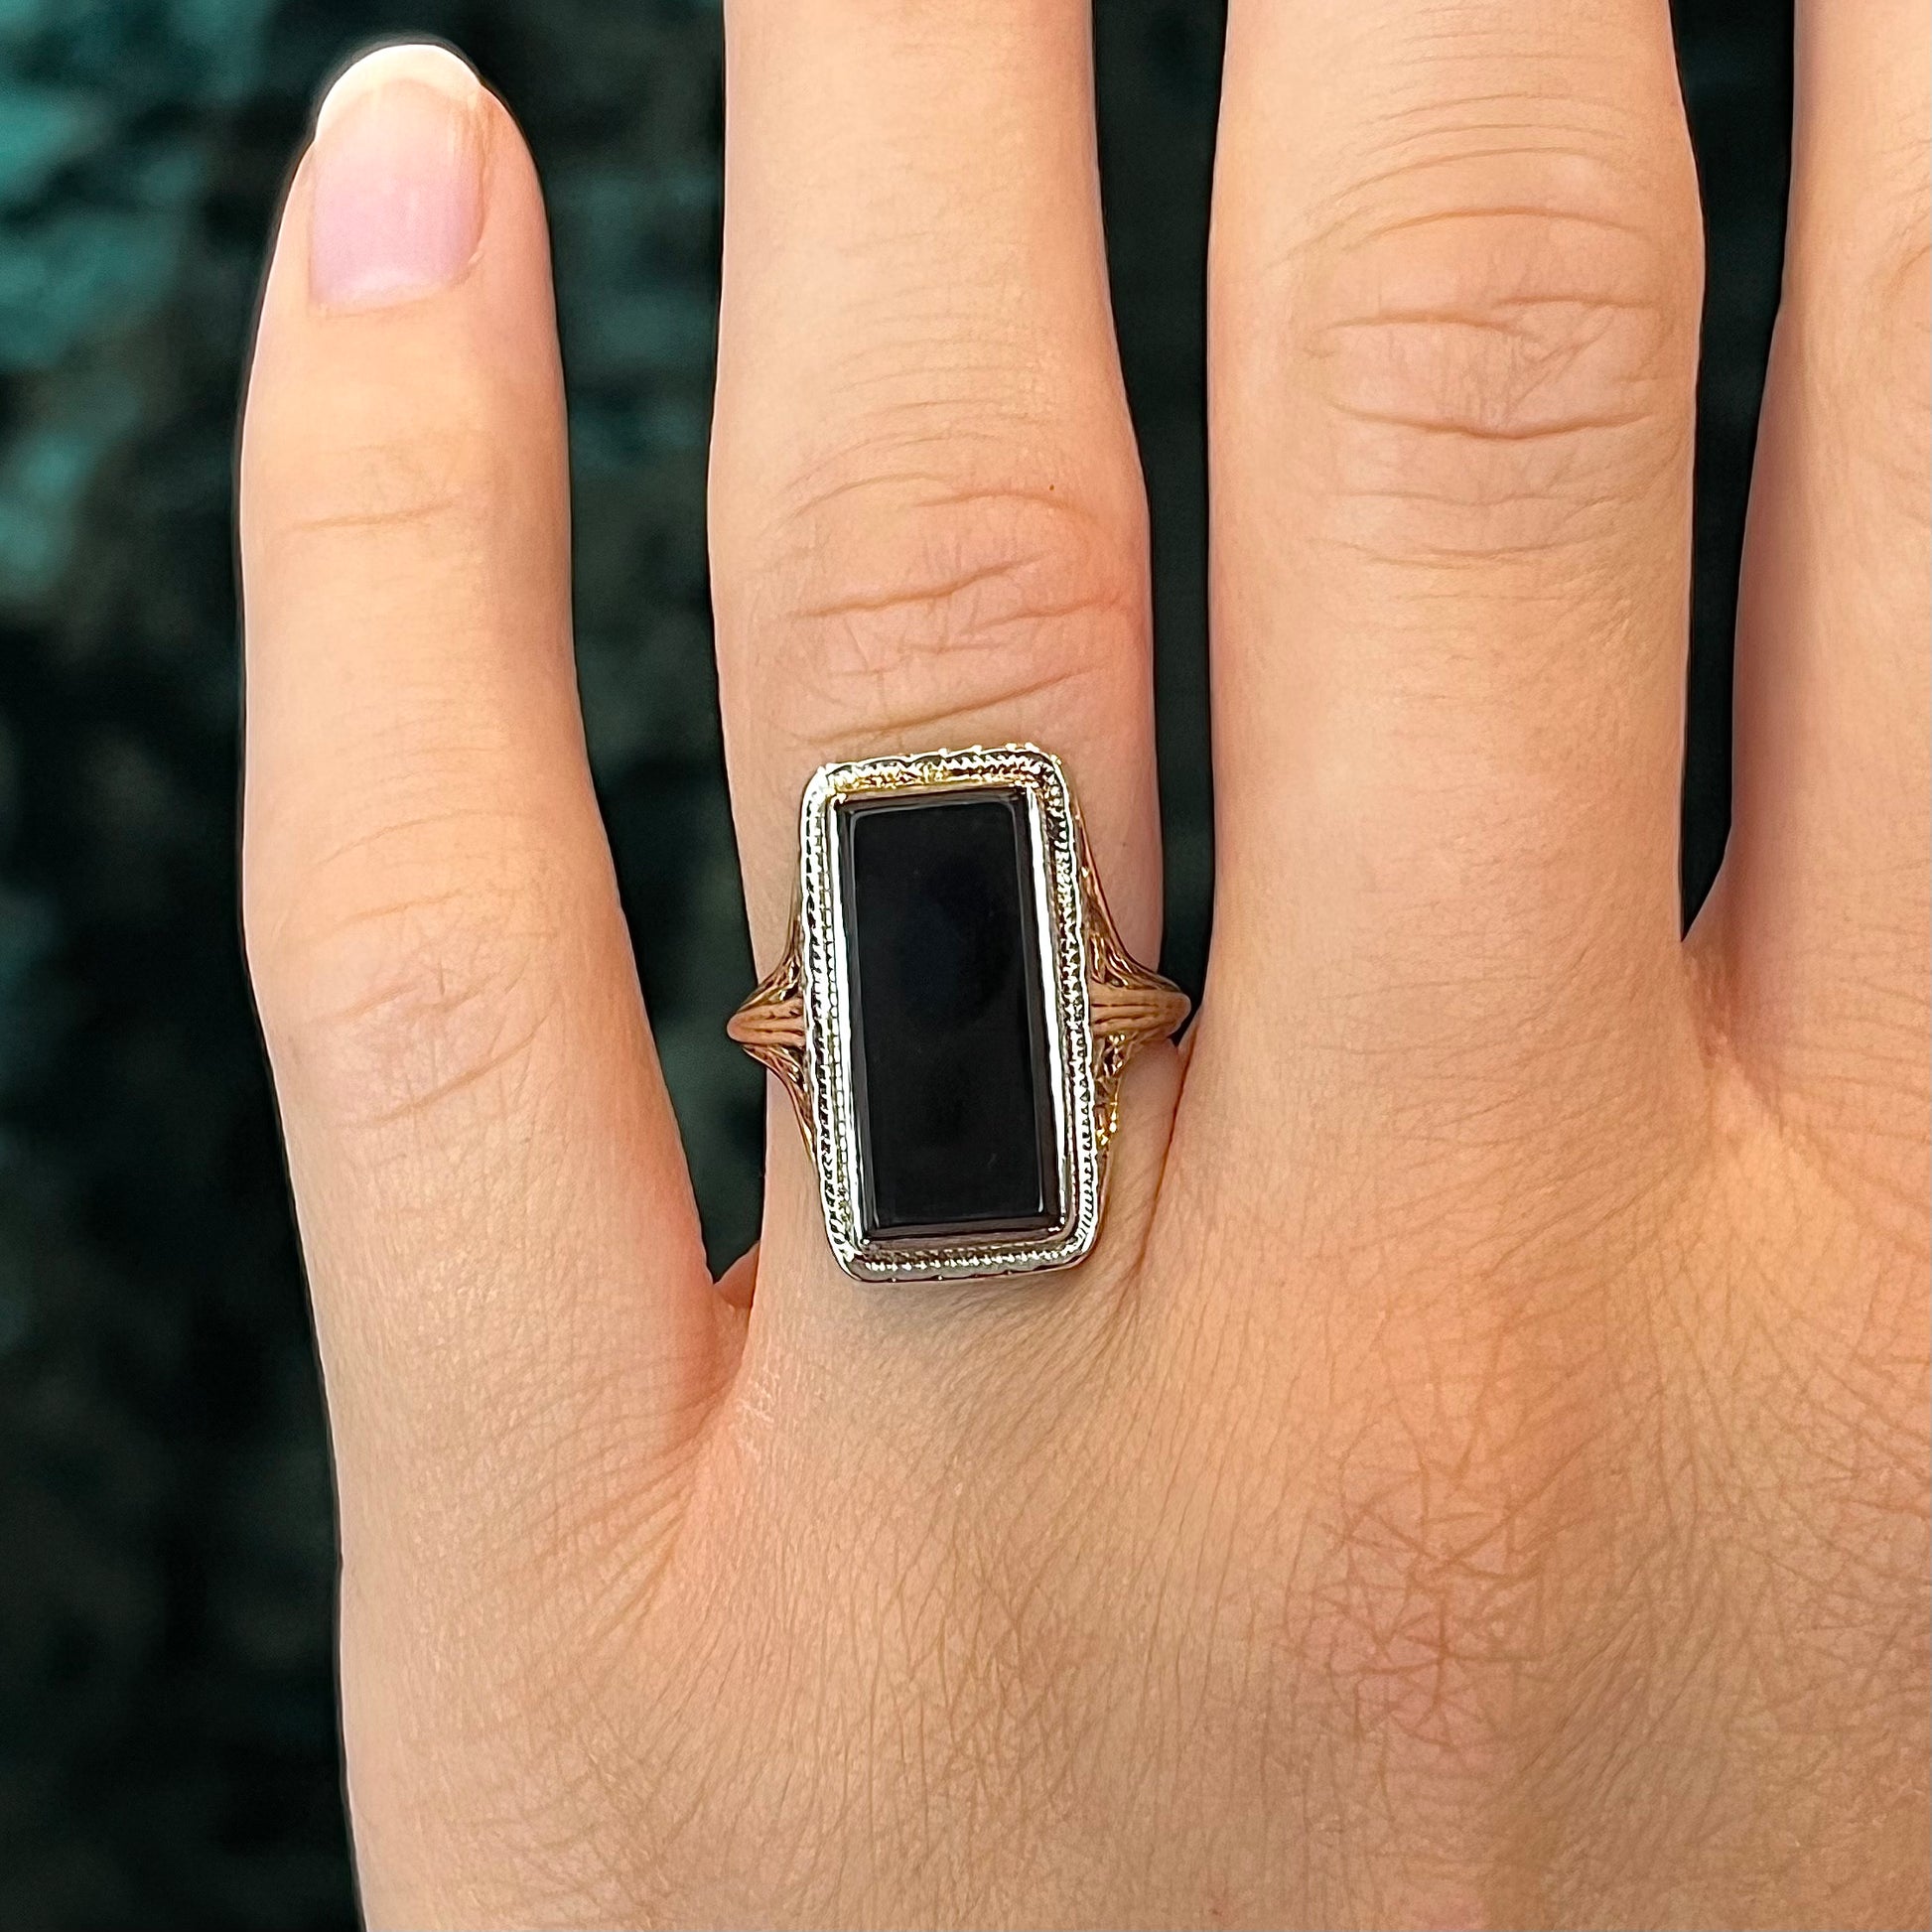 Late Art Deco Onyx Ring in 14k White & Yellow Gold